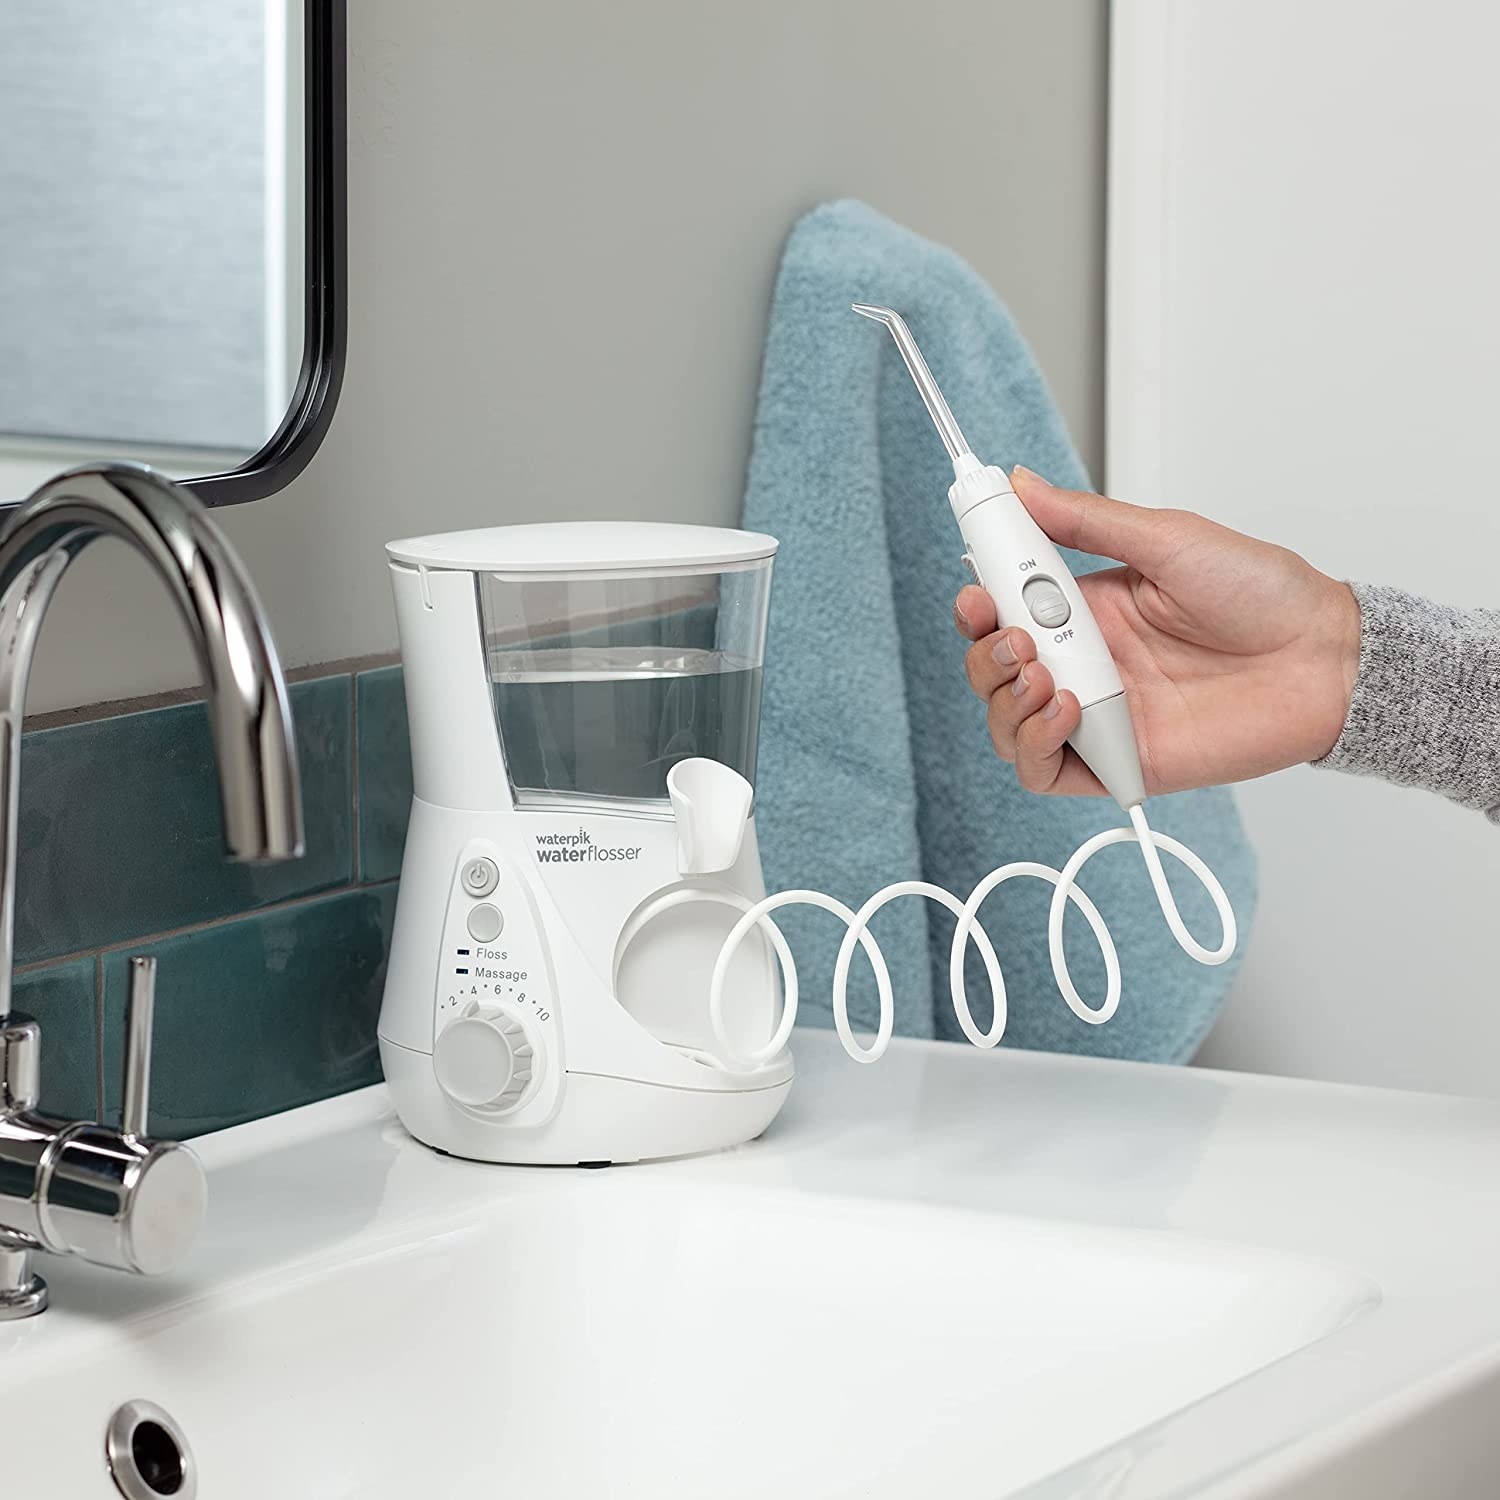 the white waterpik water flosser on a bathroom sink counter